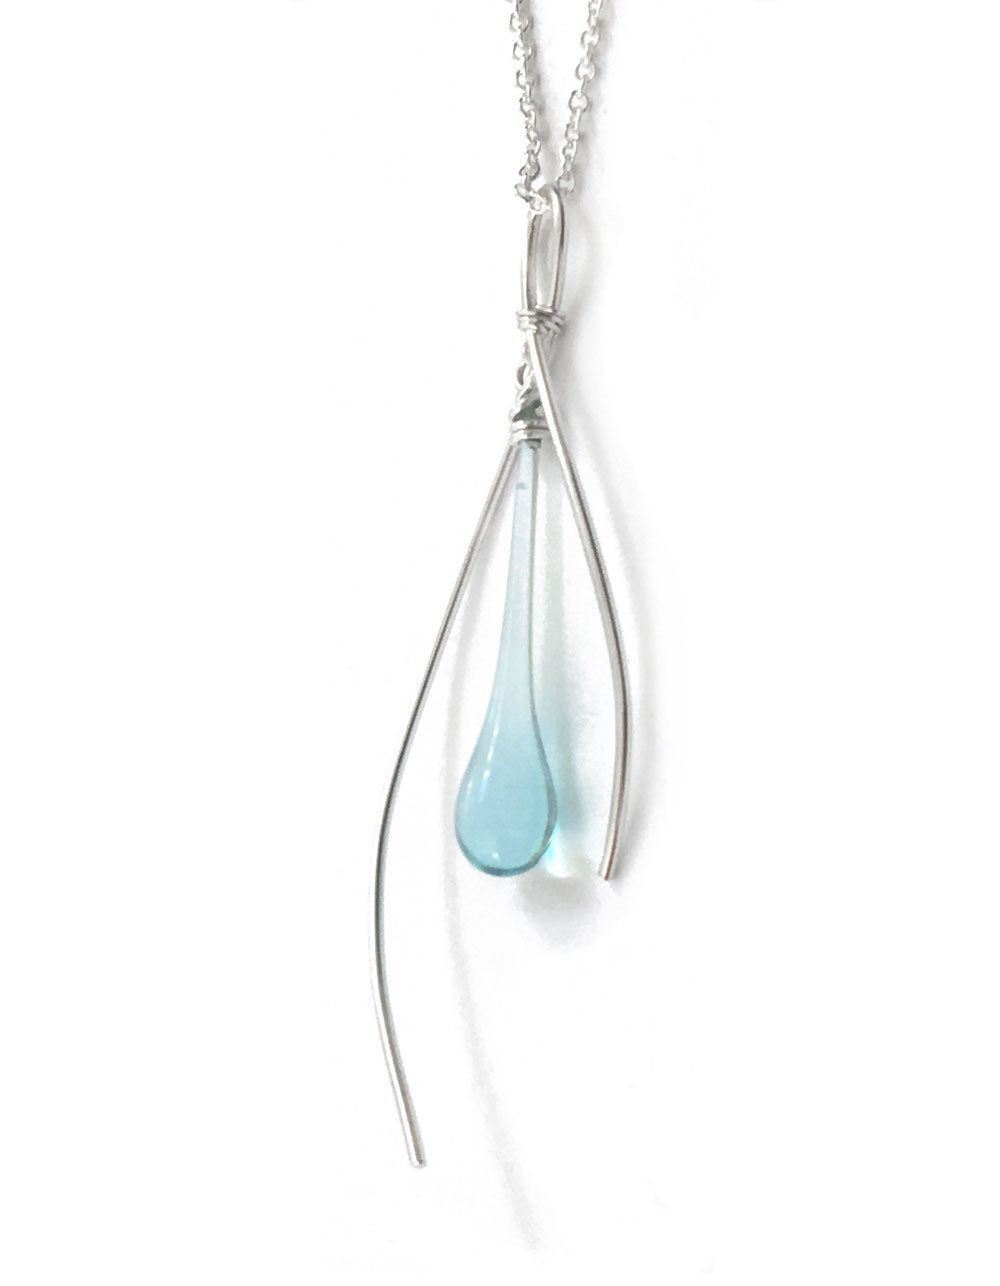 Inner Spark Pendant - glass Necklace by Sundrop Jewelry